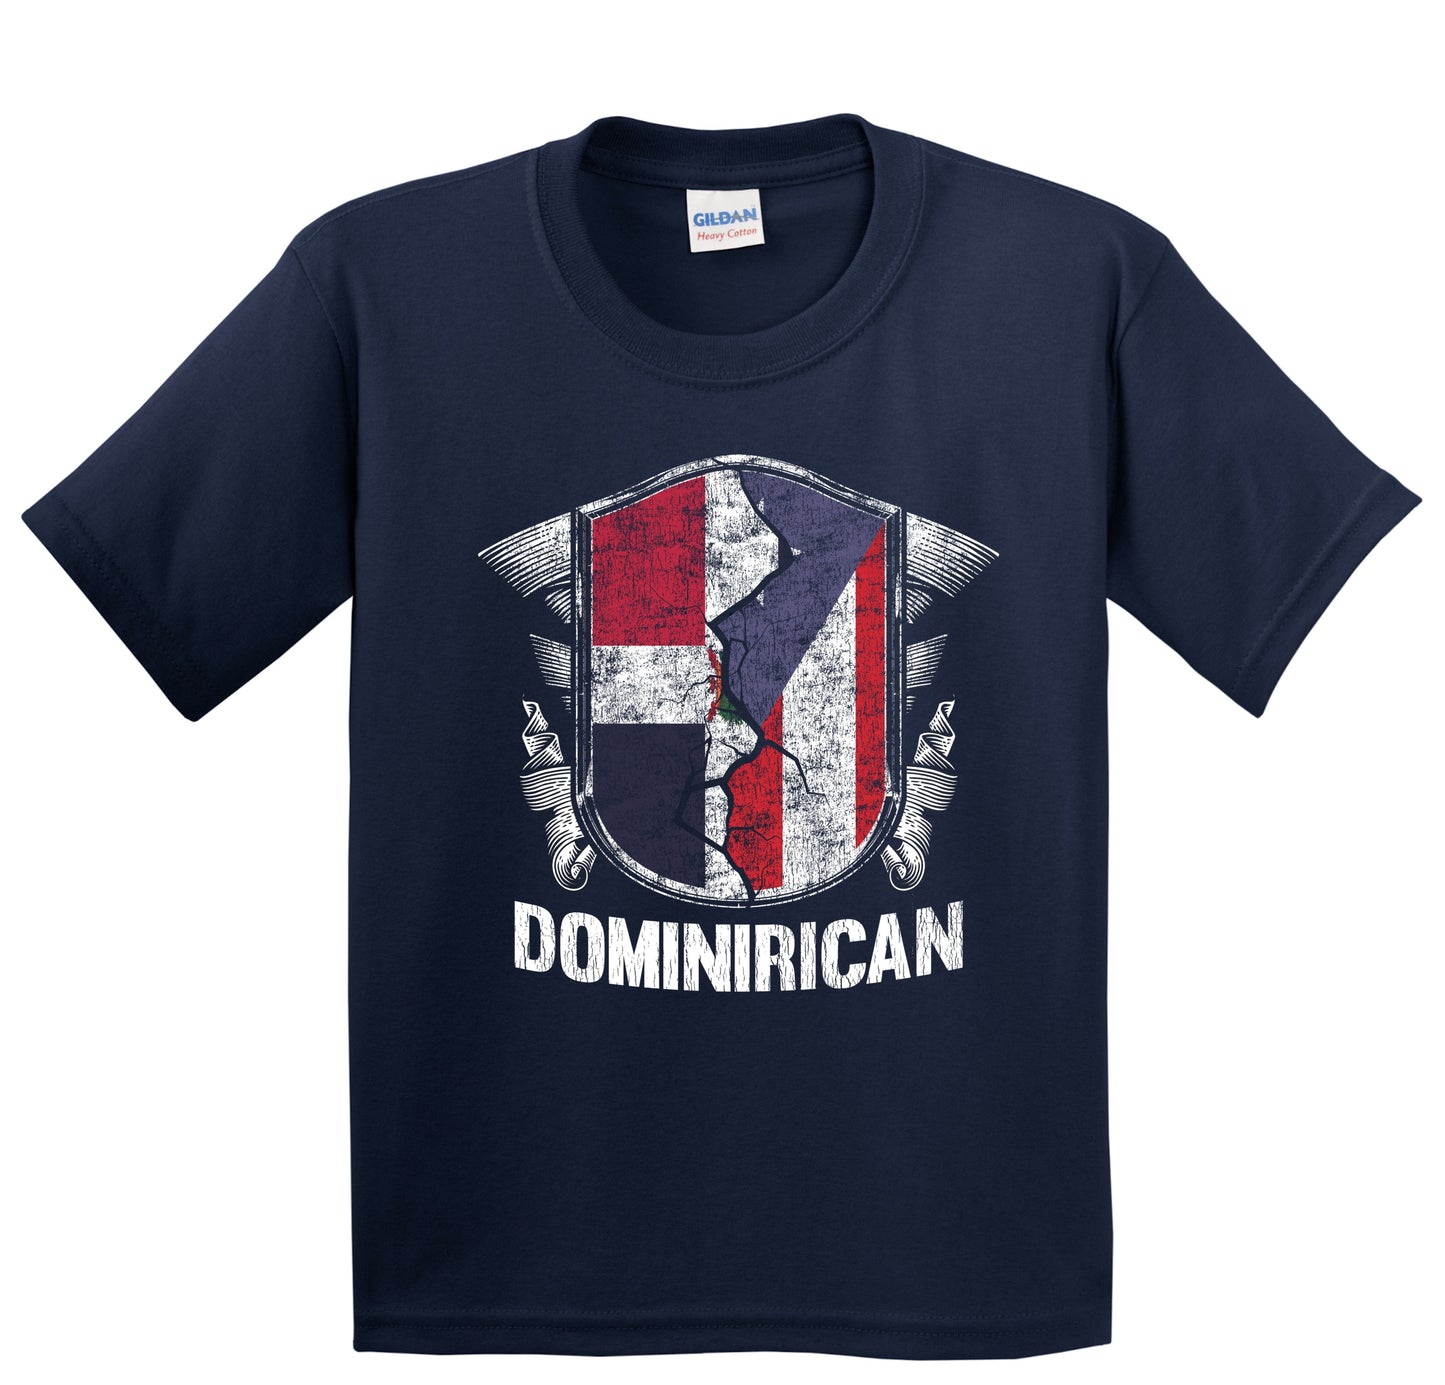 Dominirican Dominican Republic Puerto Rico Flags Youth T-Shirt